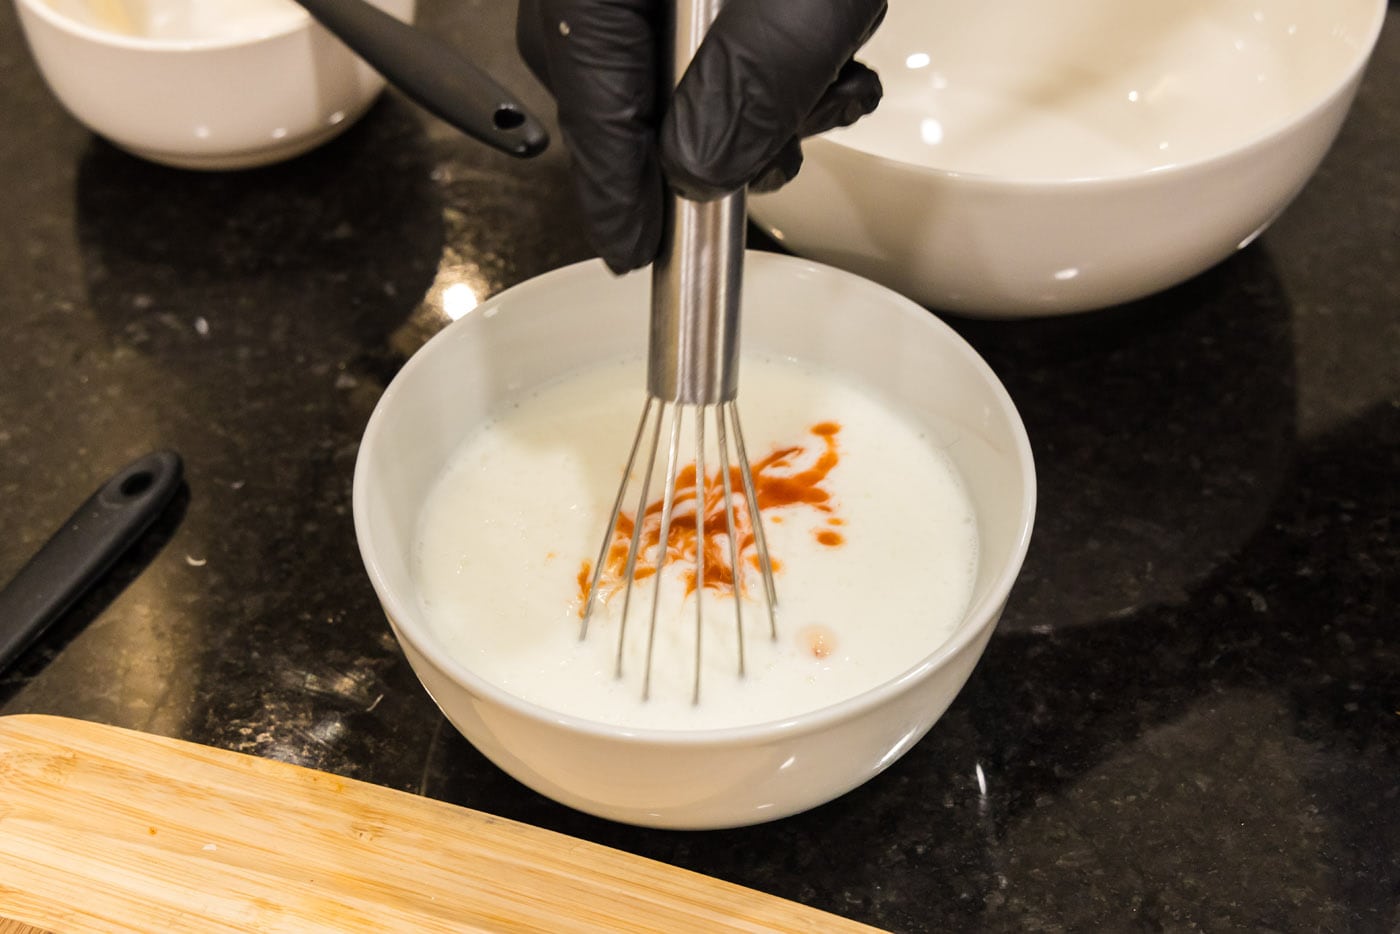 whisking hot sauce and buttermilk in a bowl